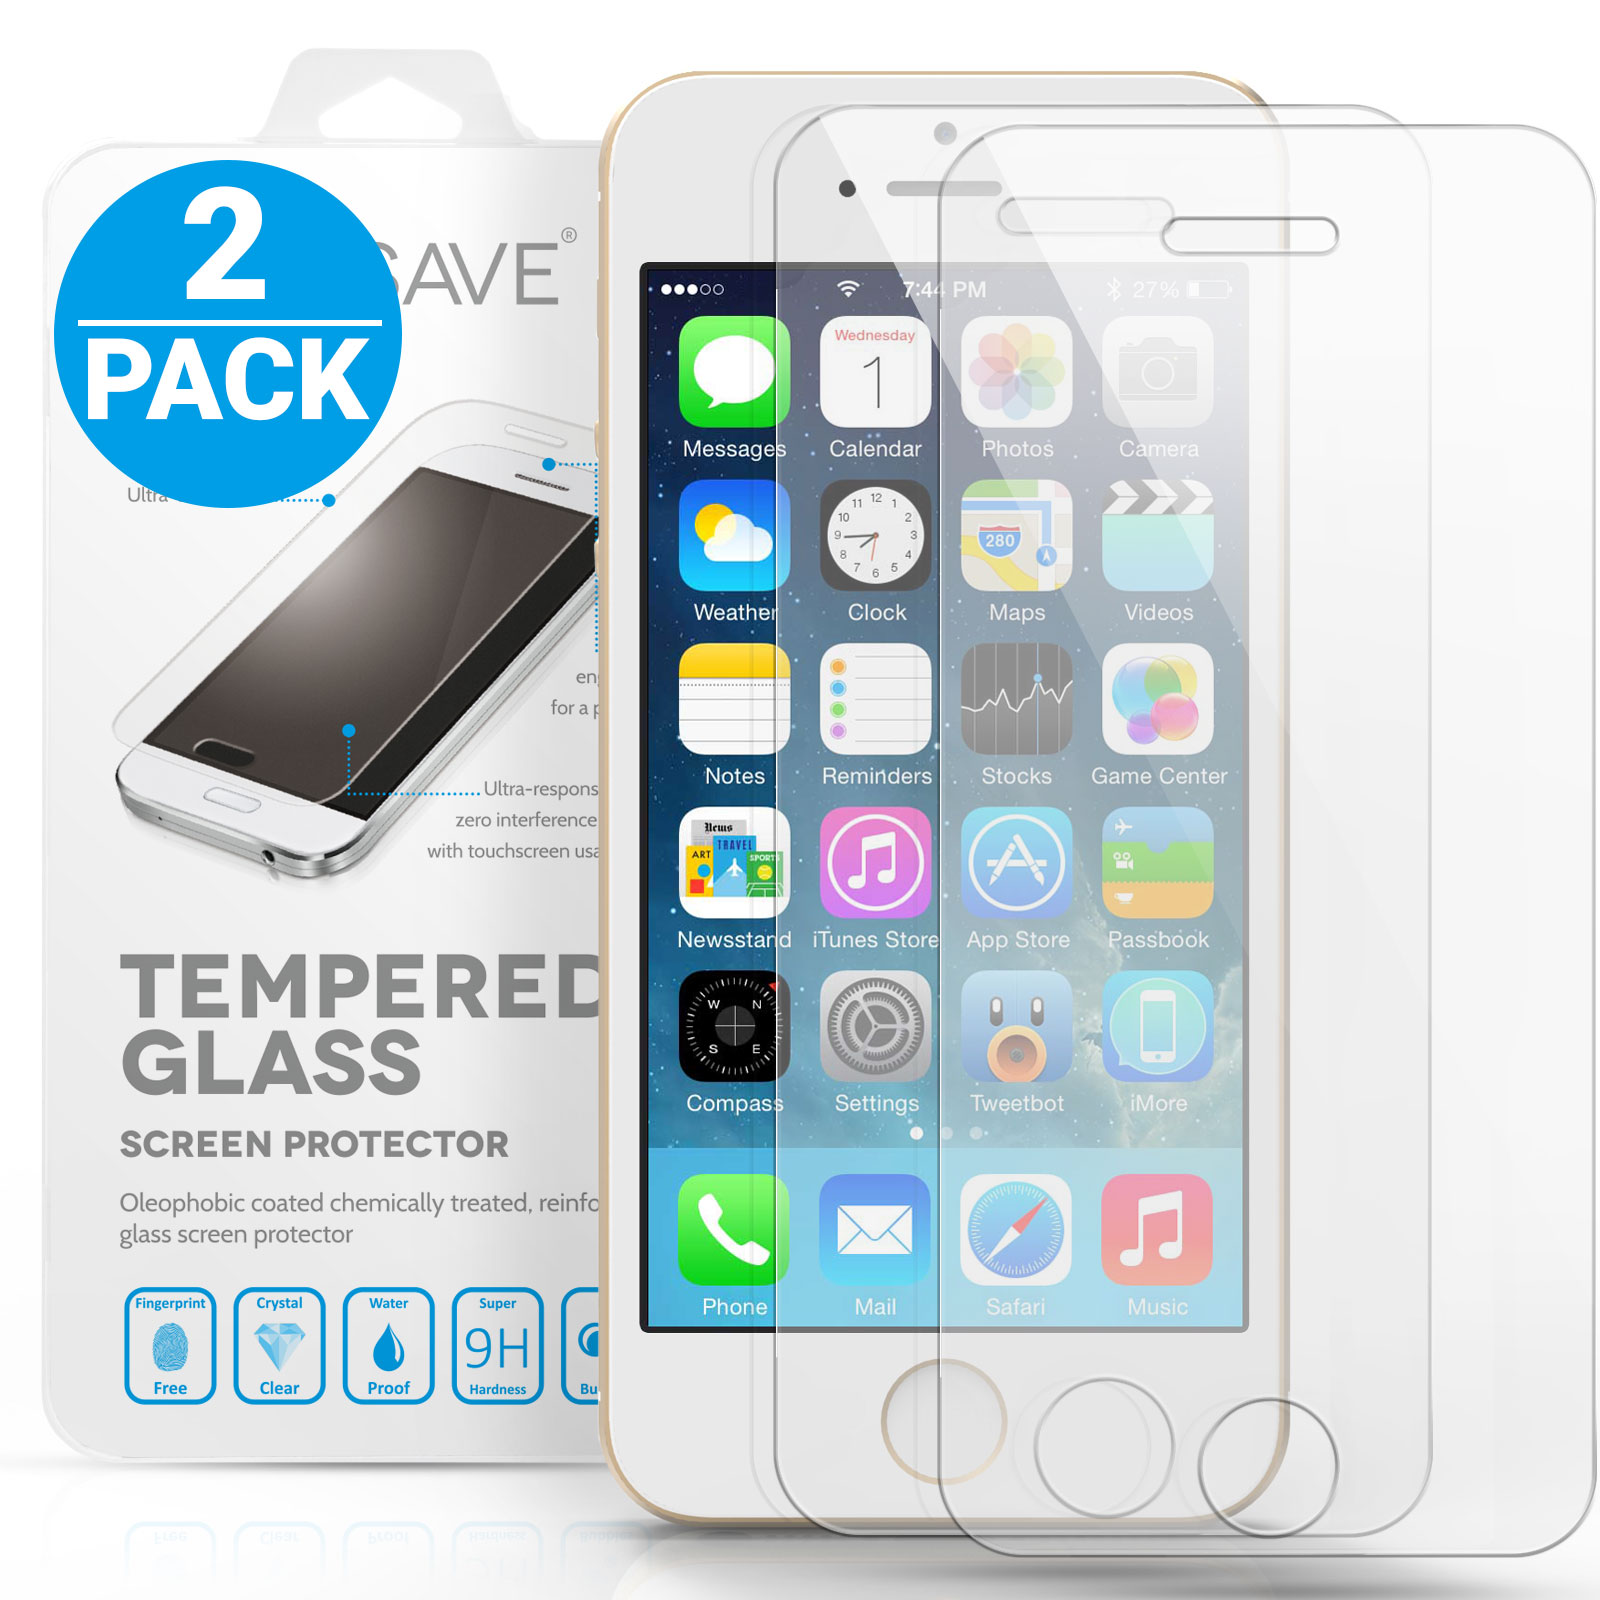 Yousave Accessories iPhone SE / 5s / 5C Glass Screen Protector - Twin Pack